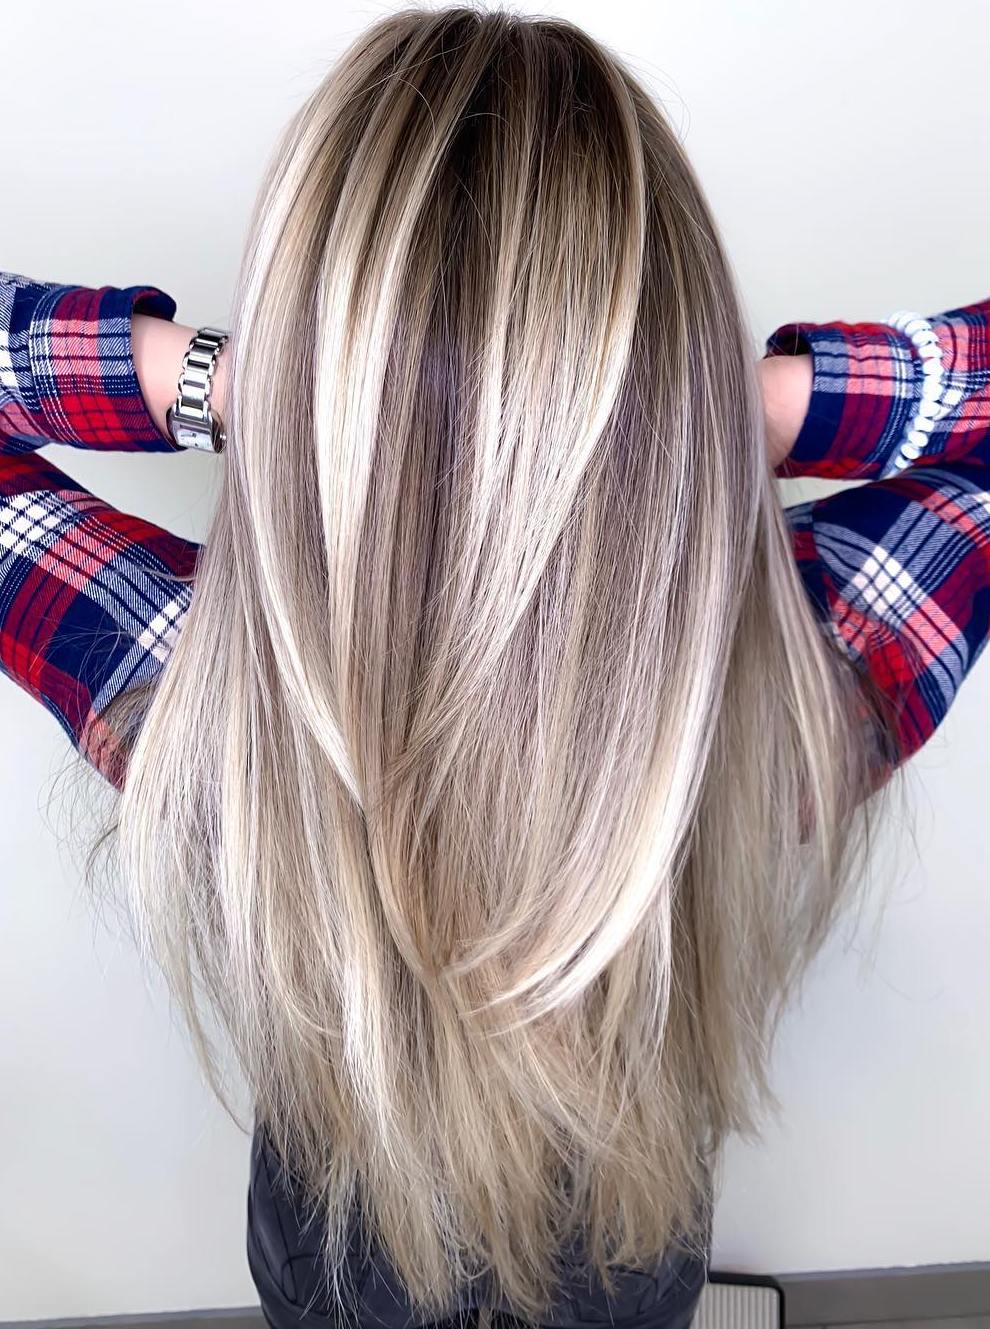 Long Blonde Hair With Layered Ends